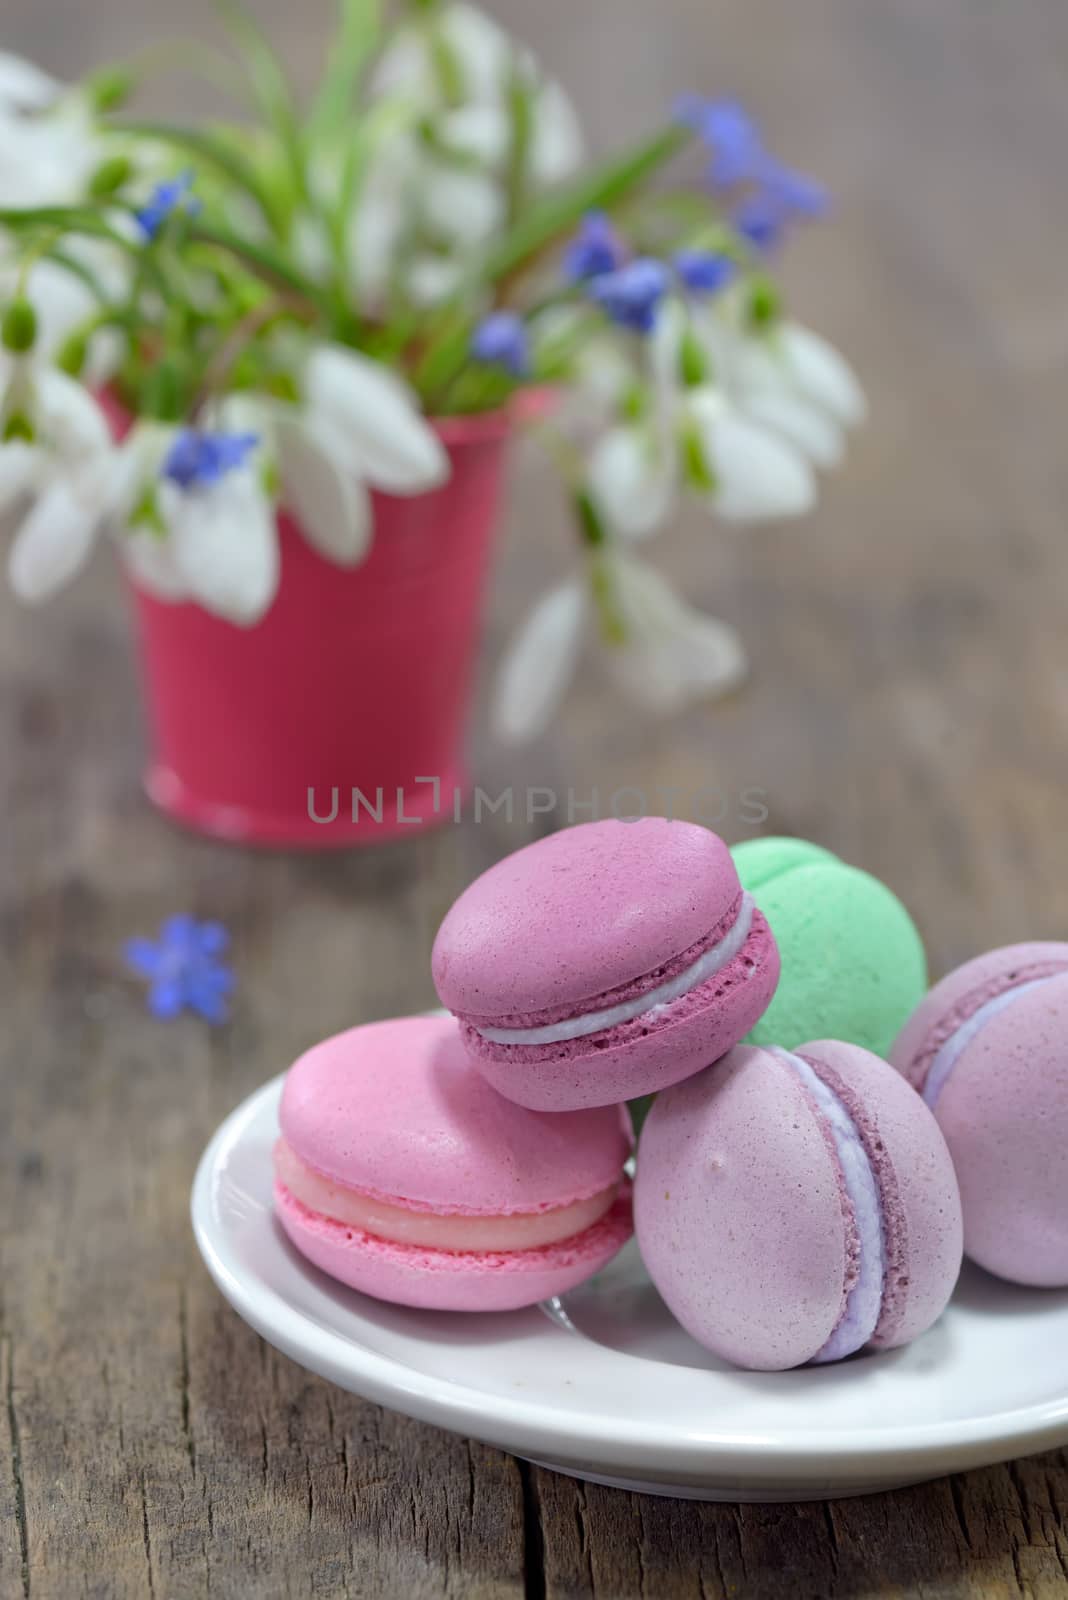 traditional french colorful macarons by mady70